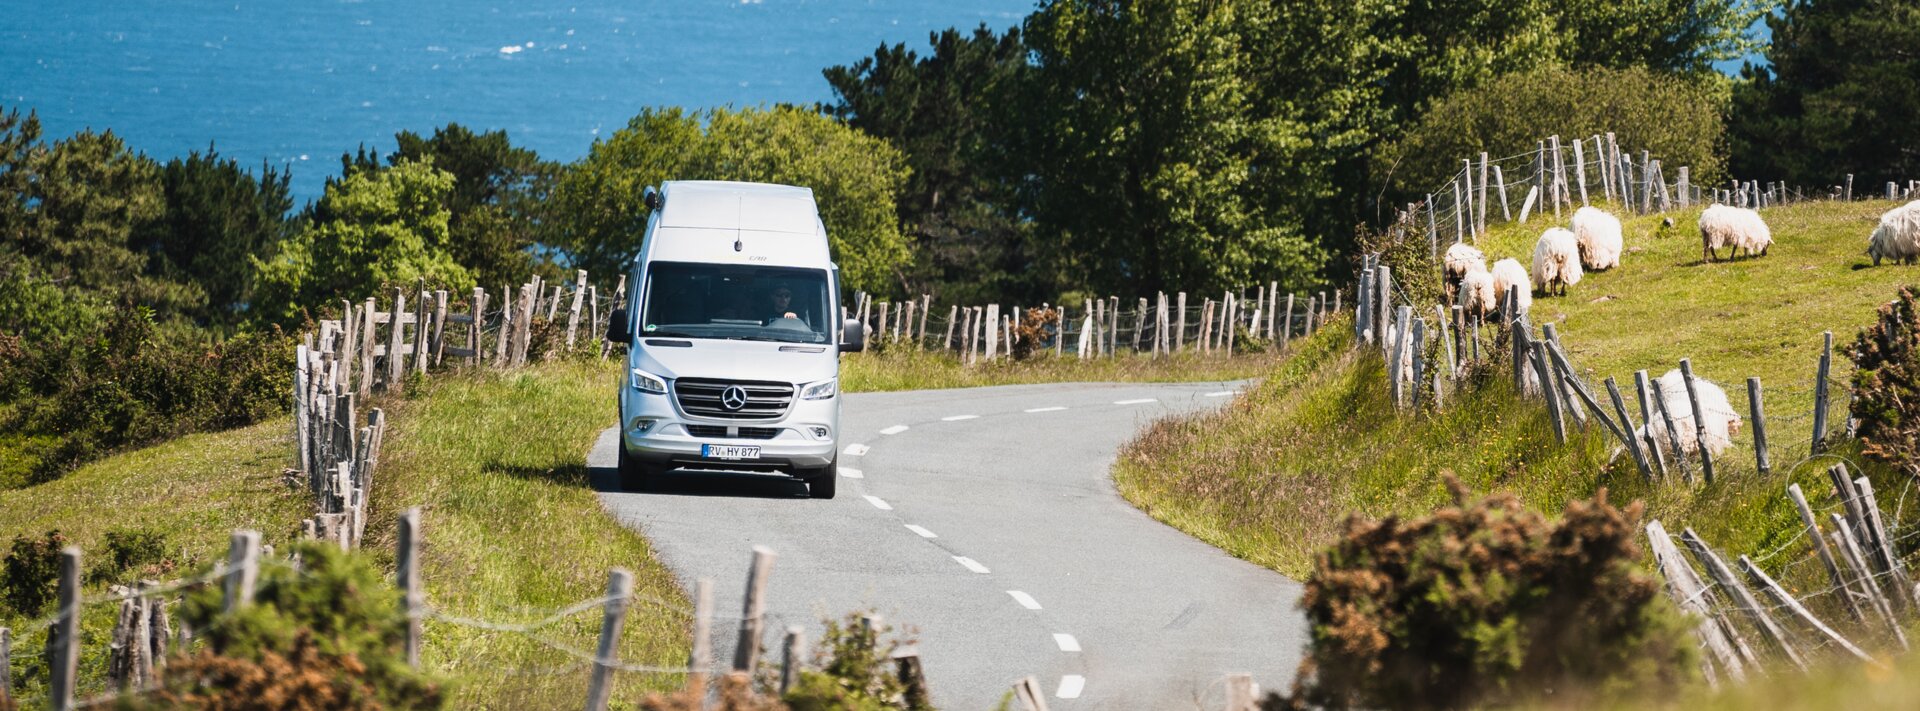 Mercedes Sprinter based HYMER Grand Canyon S on the road next to fenced pasture meadows with sheep, trees and a lake